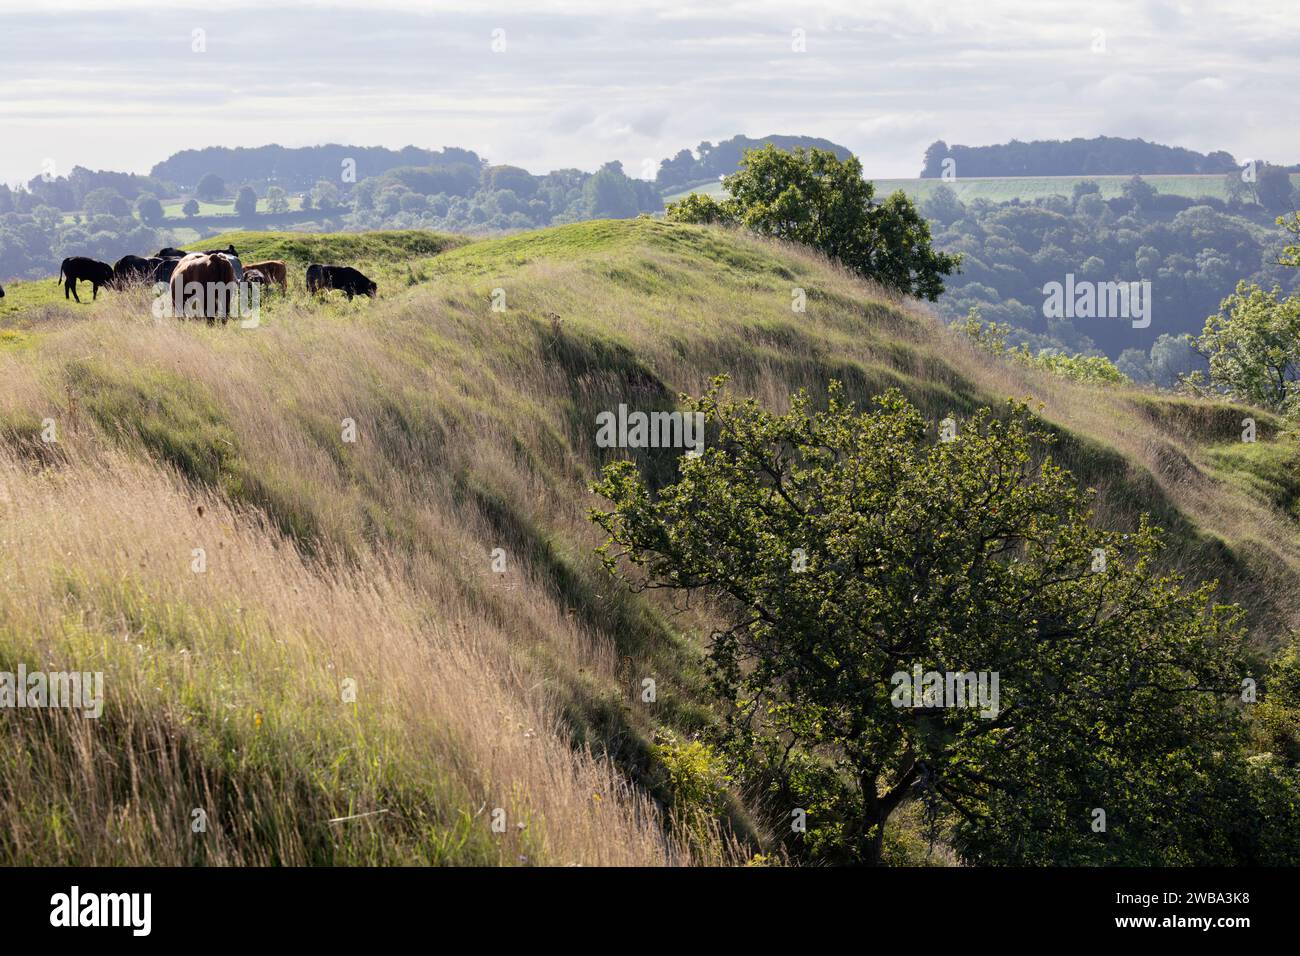 Cows on ramparts of Uley Bury iron-age hillfort, Uley, near Dursley, Cotswolds, Gloucestershire, England, United Kingdom, Europe Stock Photo